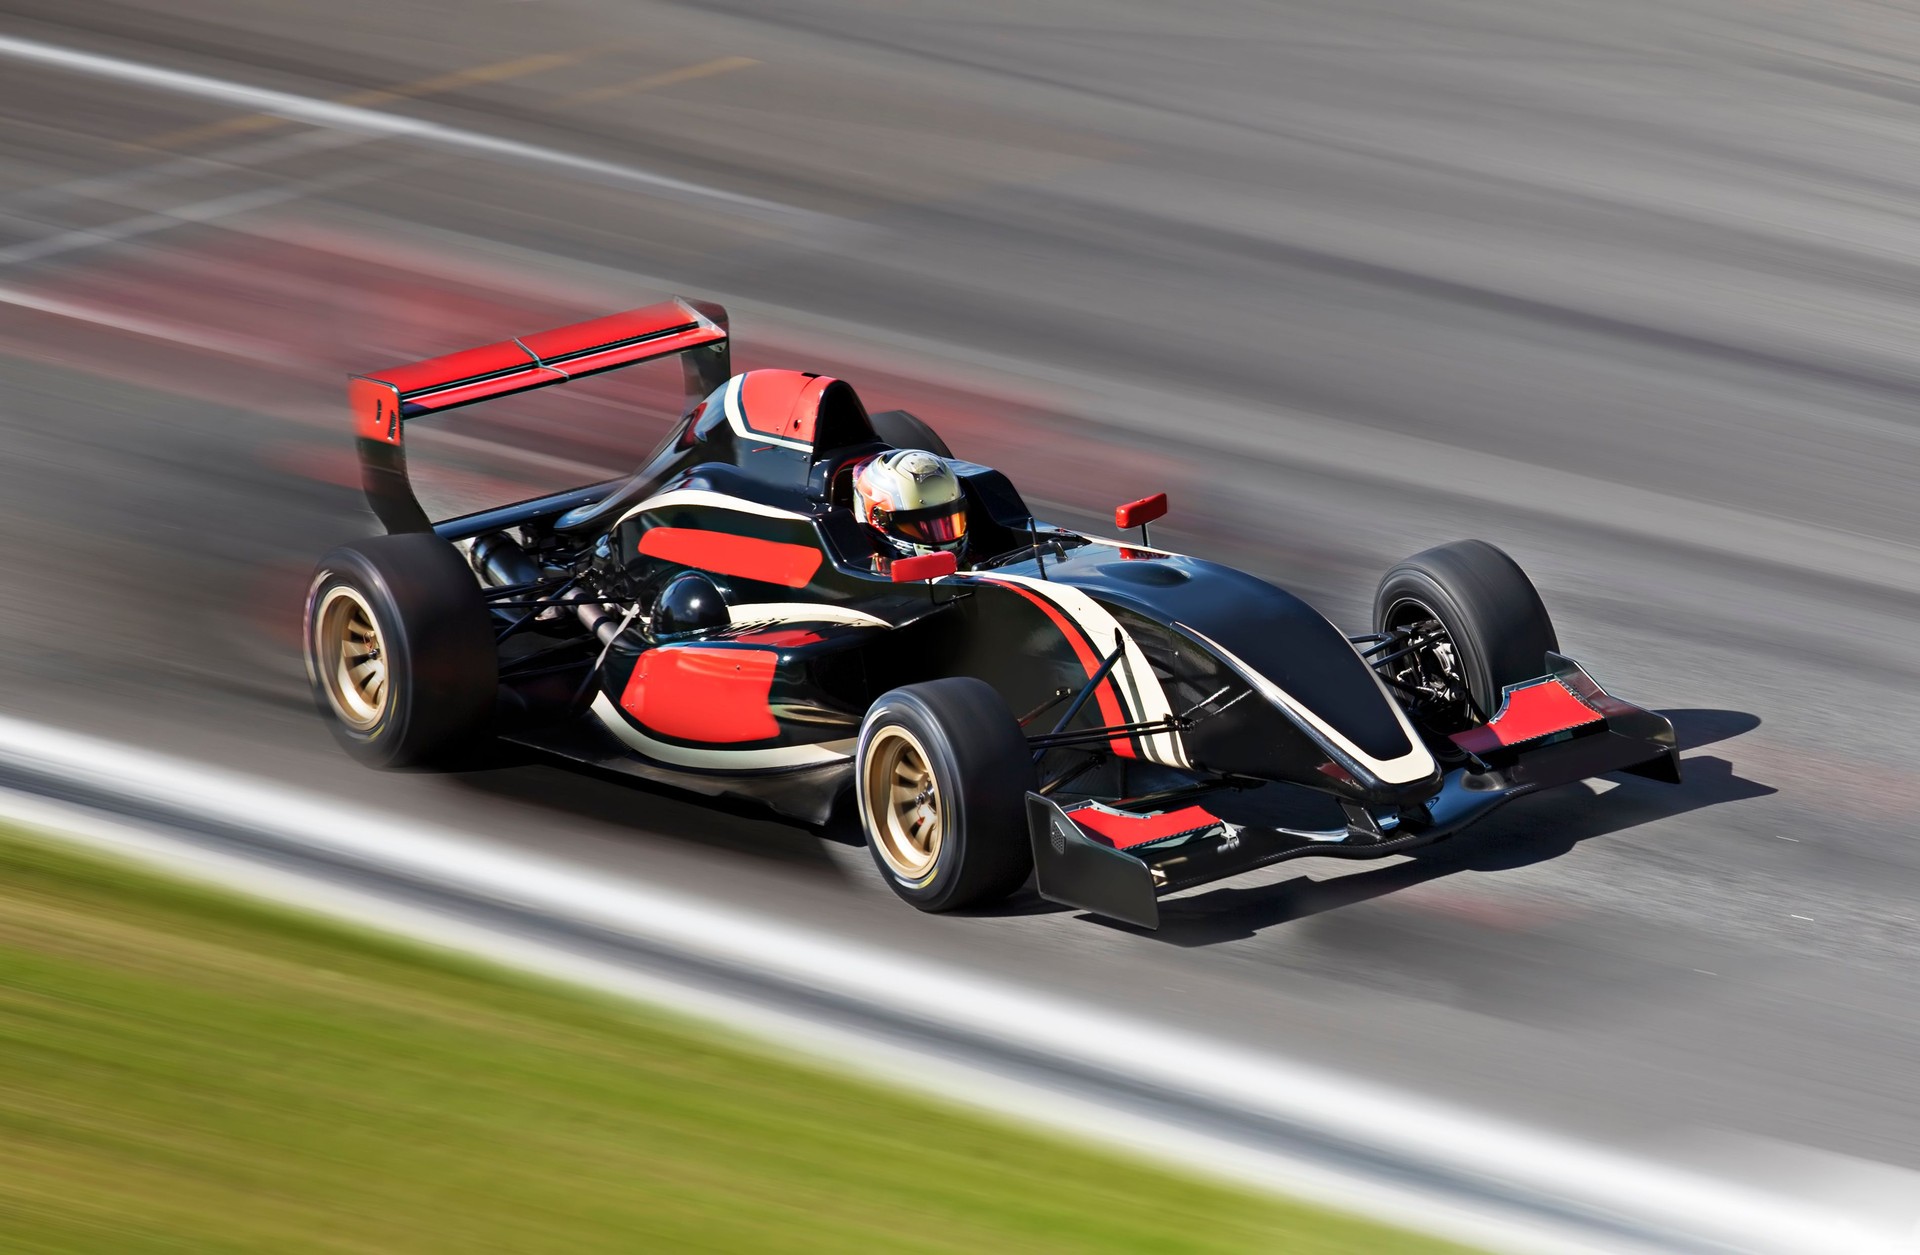 An F1 race car in action